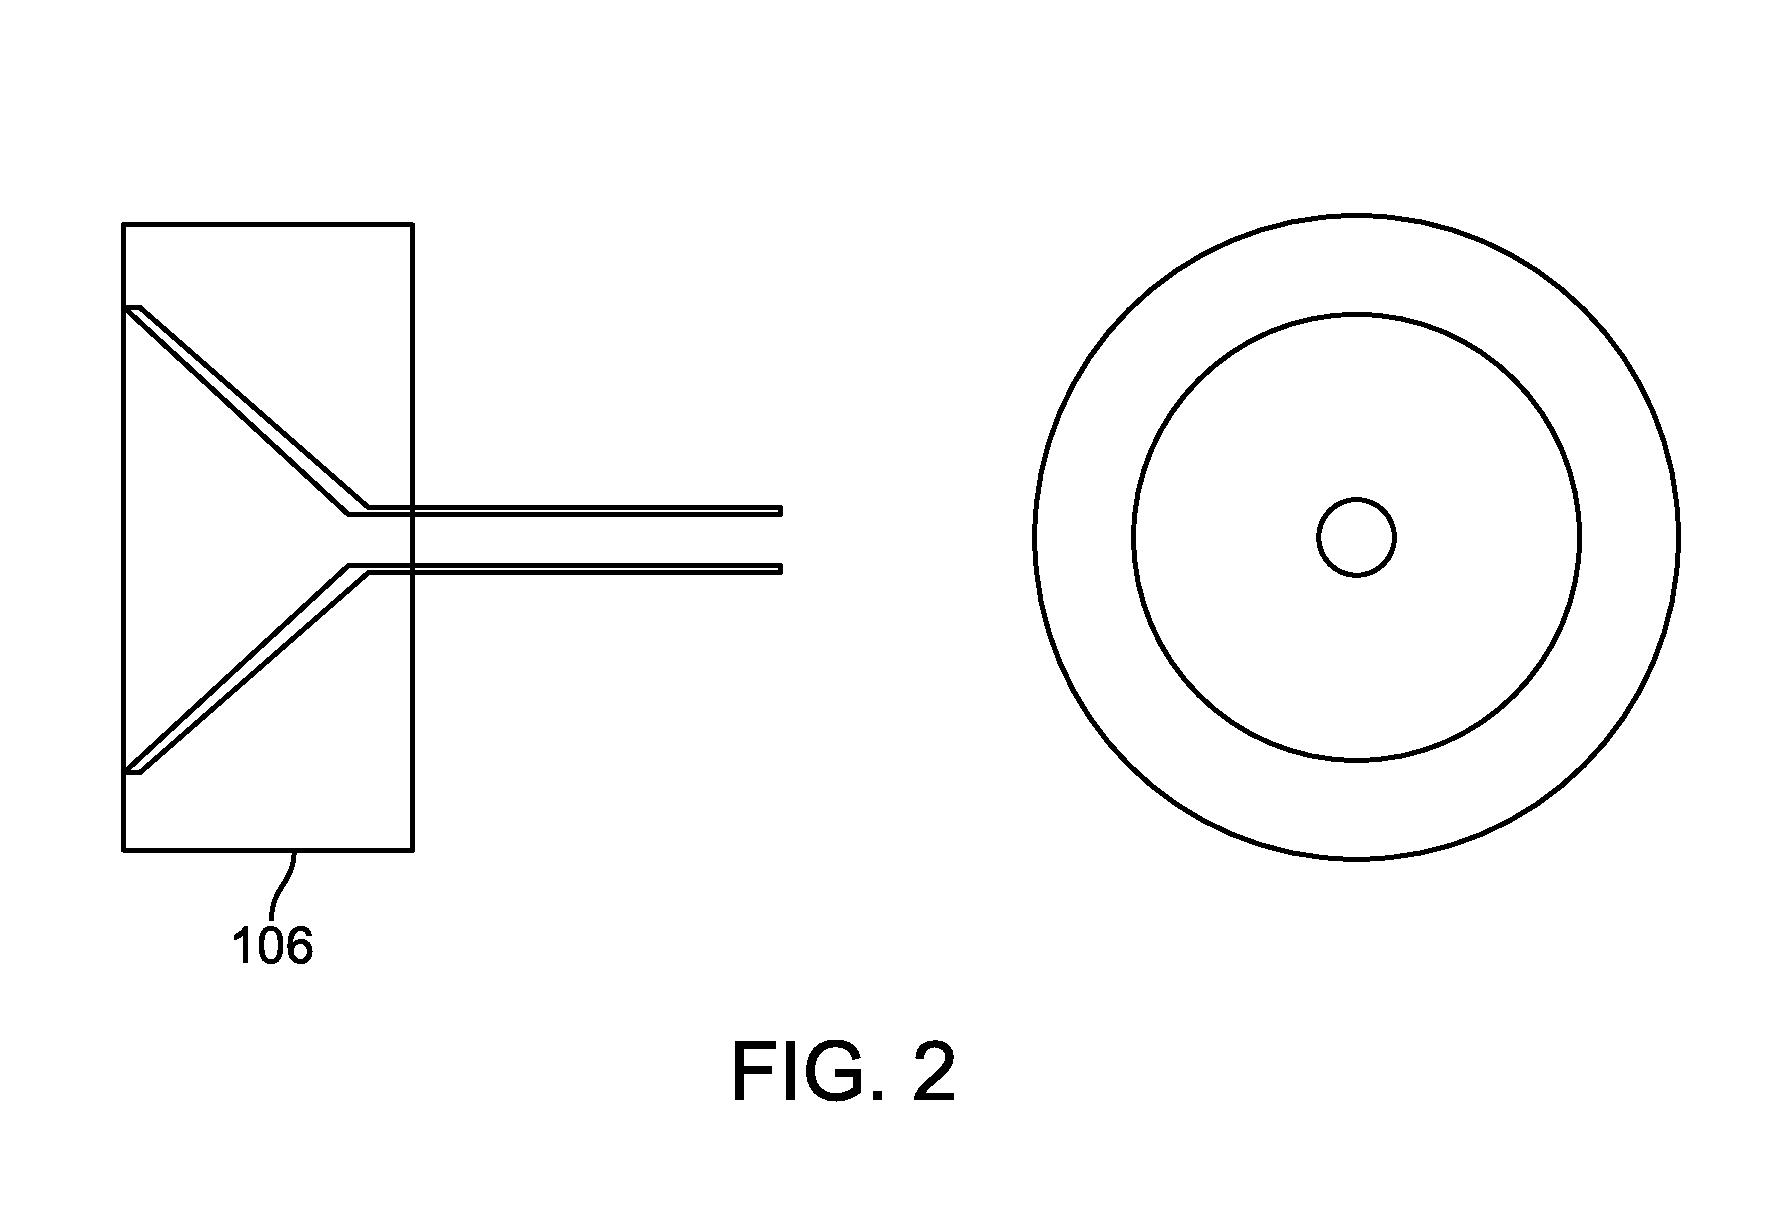 Method, apparatus and system for a water jet